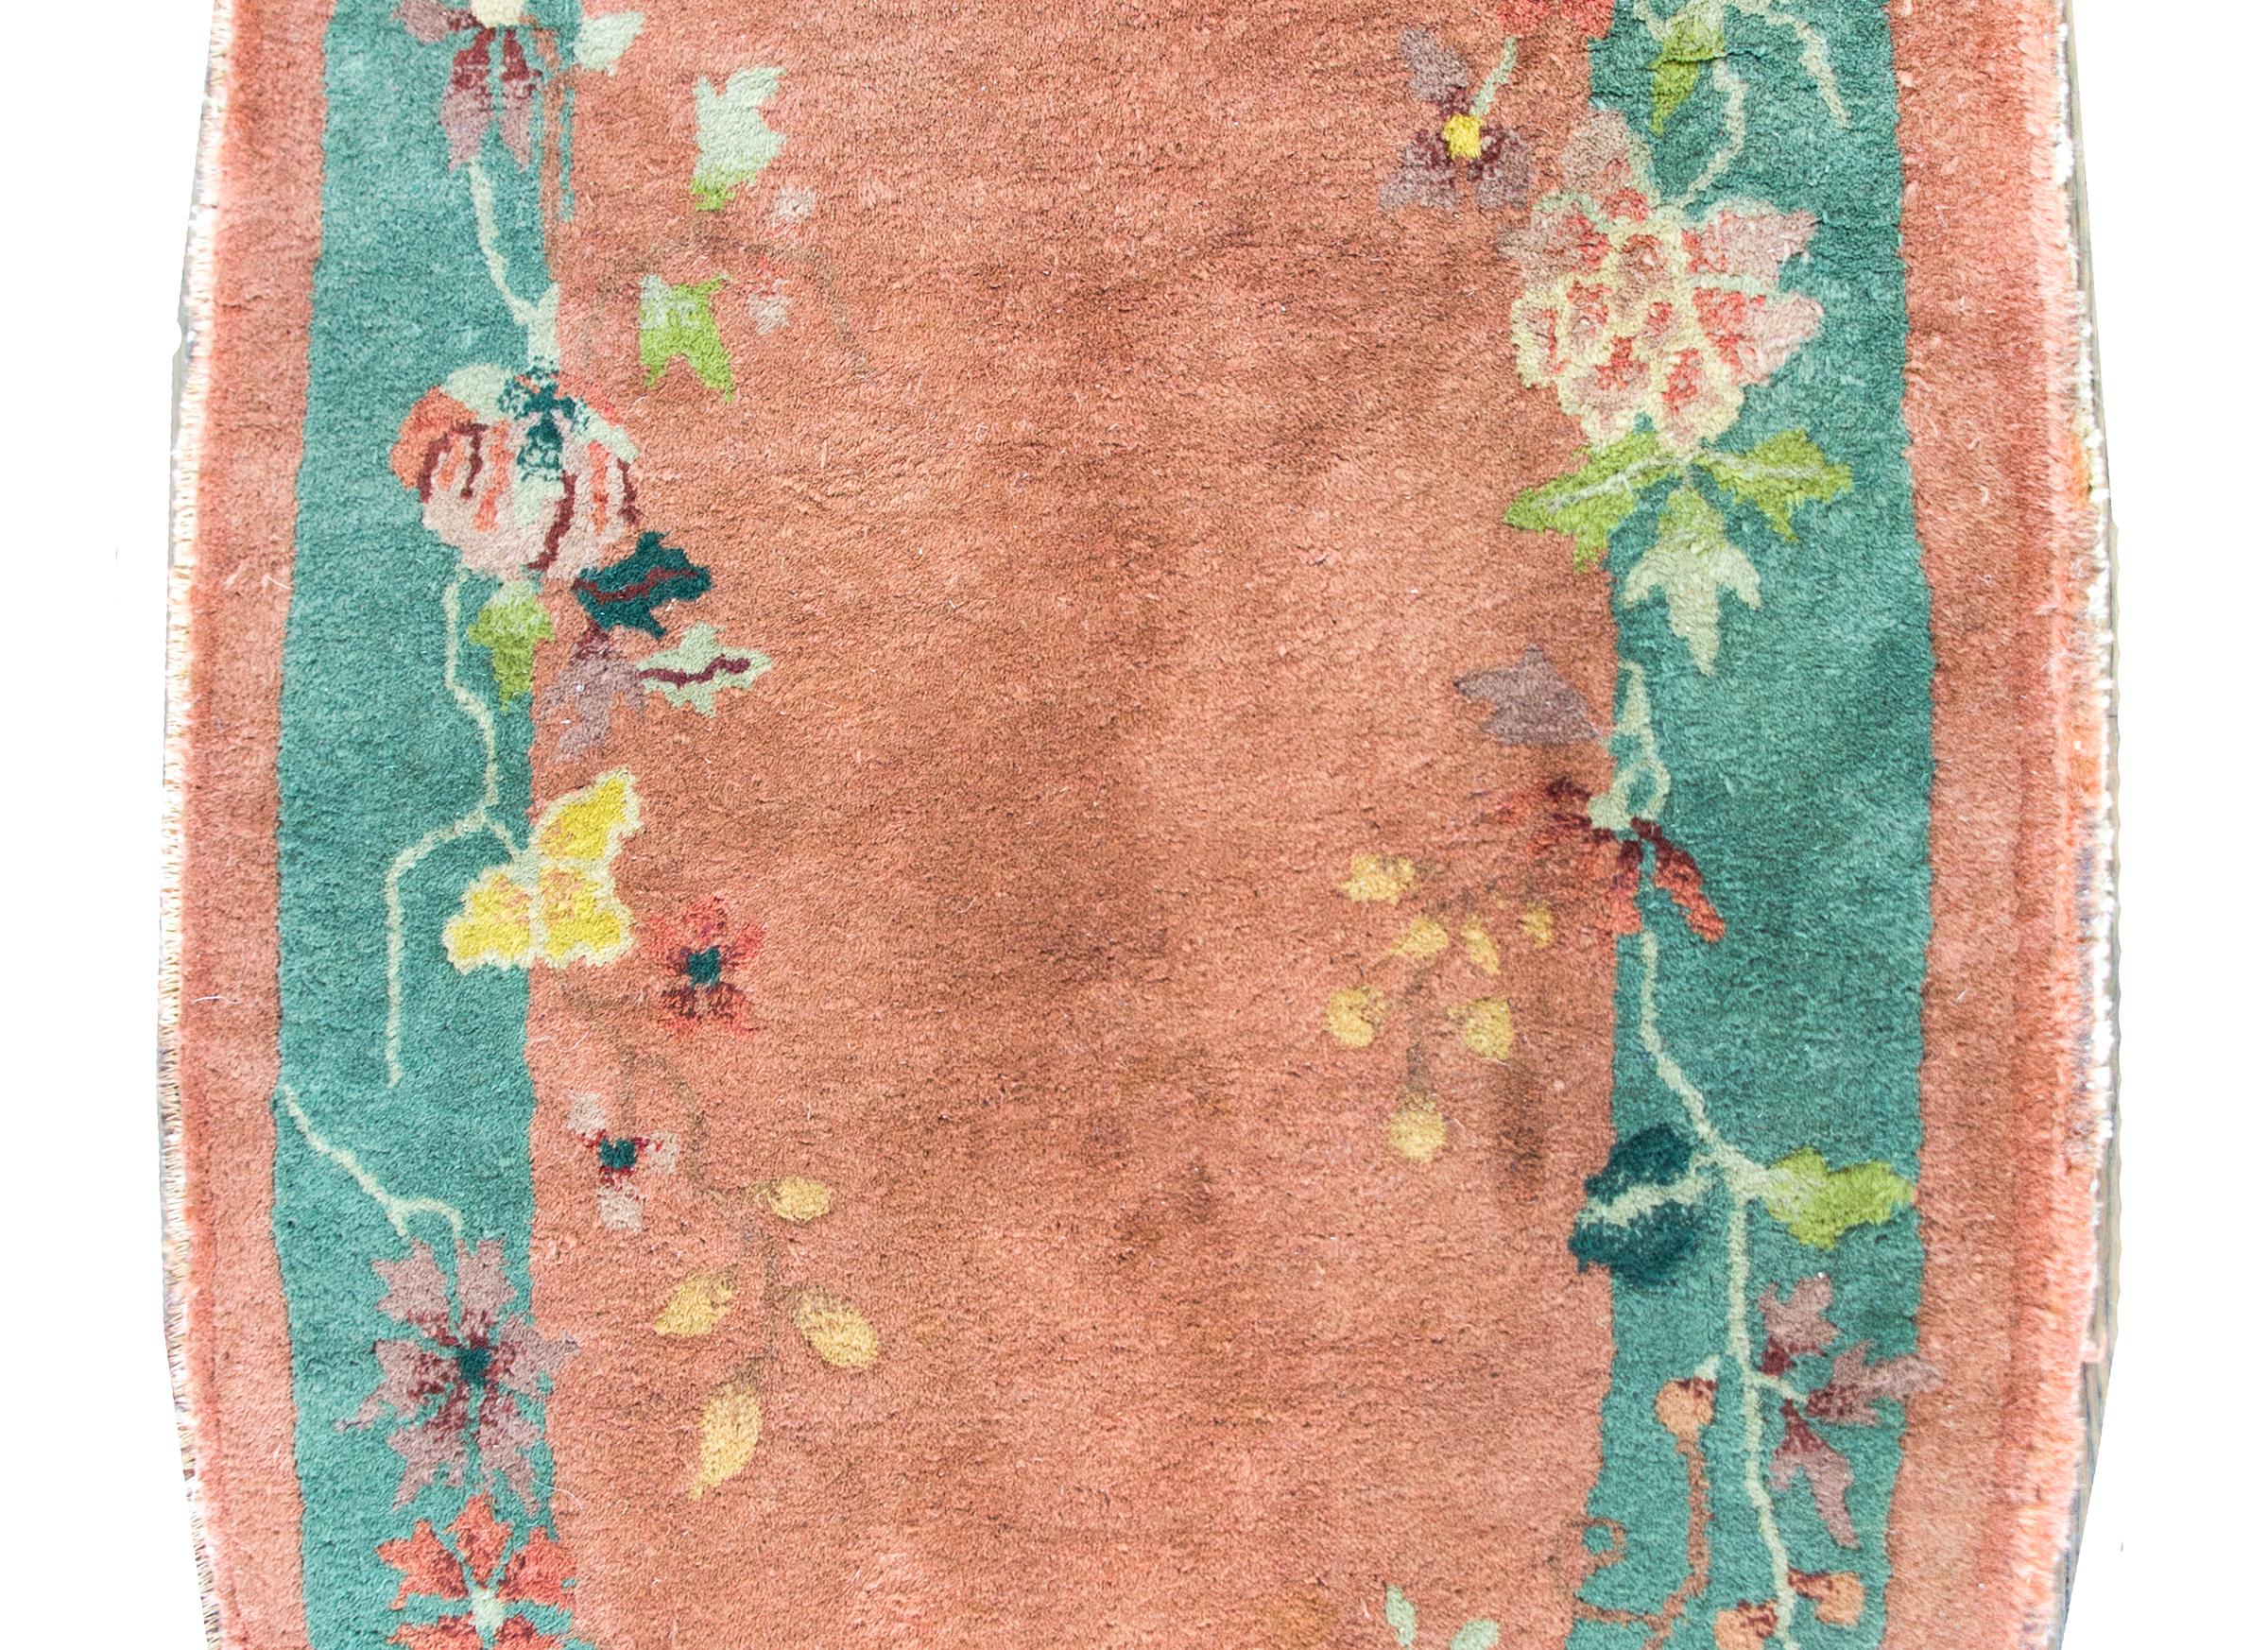 A sweet early 20th century oval Chinese Art Deco rug with a peach central field surrounded by a teal and peach border overlaid with multi-colored peonies, cherry blossoms, lotus, and chrysanthemums.  